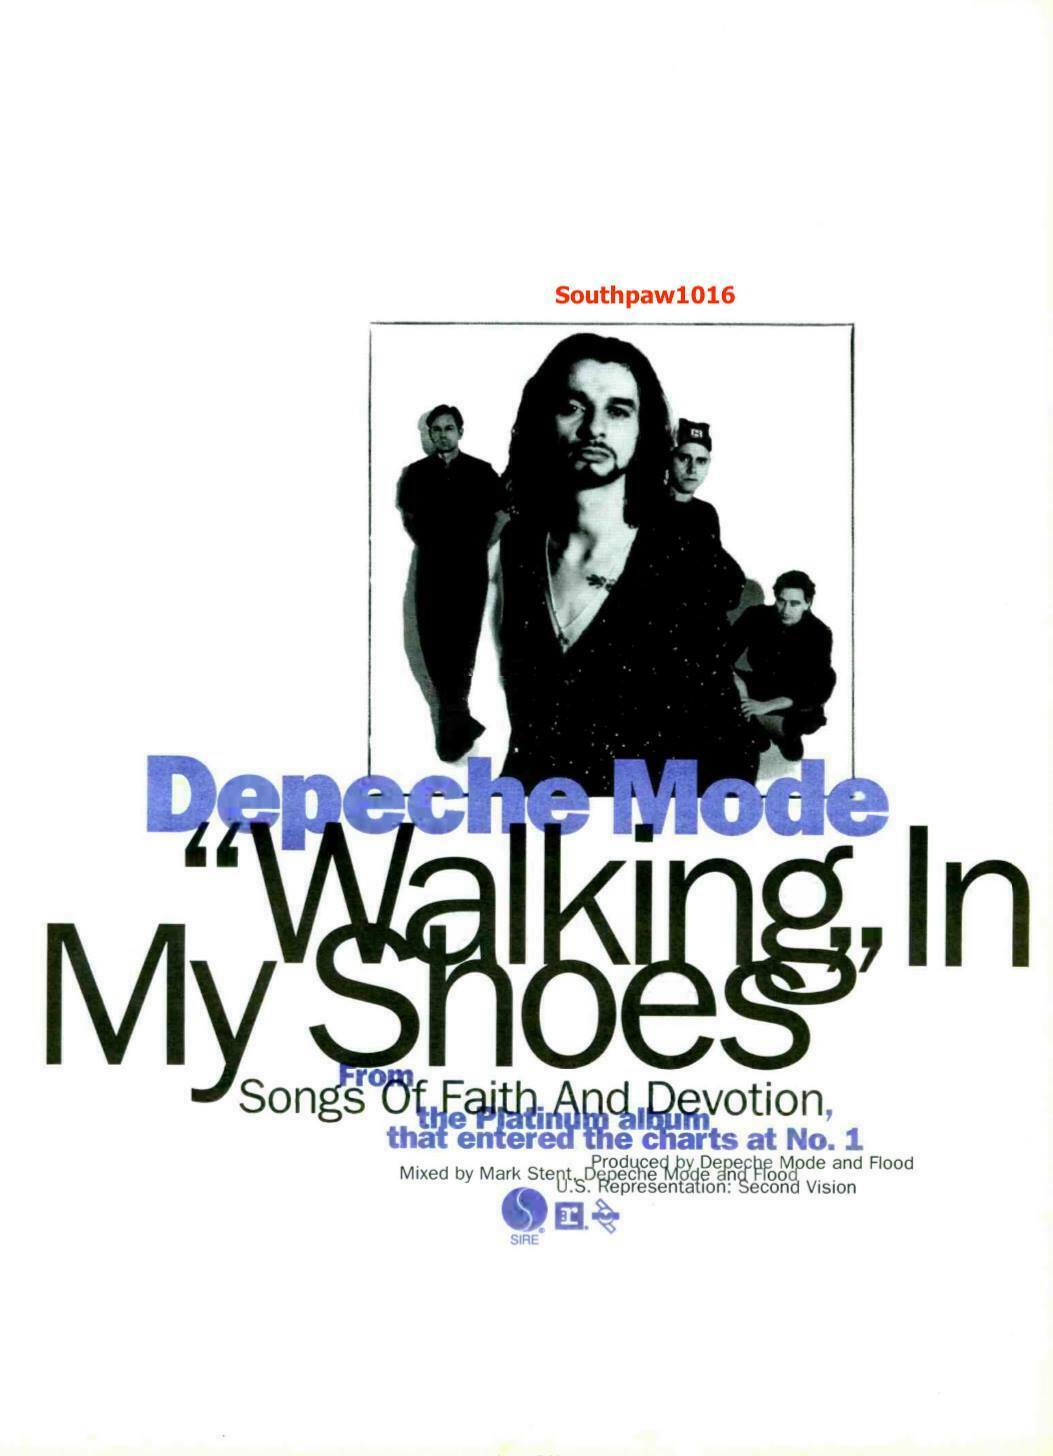 1993 Depeche Mode "Walking In My Shoes" Song Release Industry Promo Reprint Ad